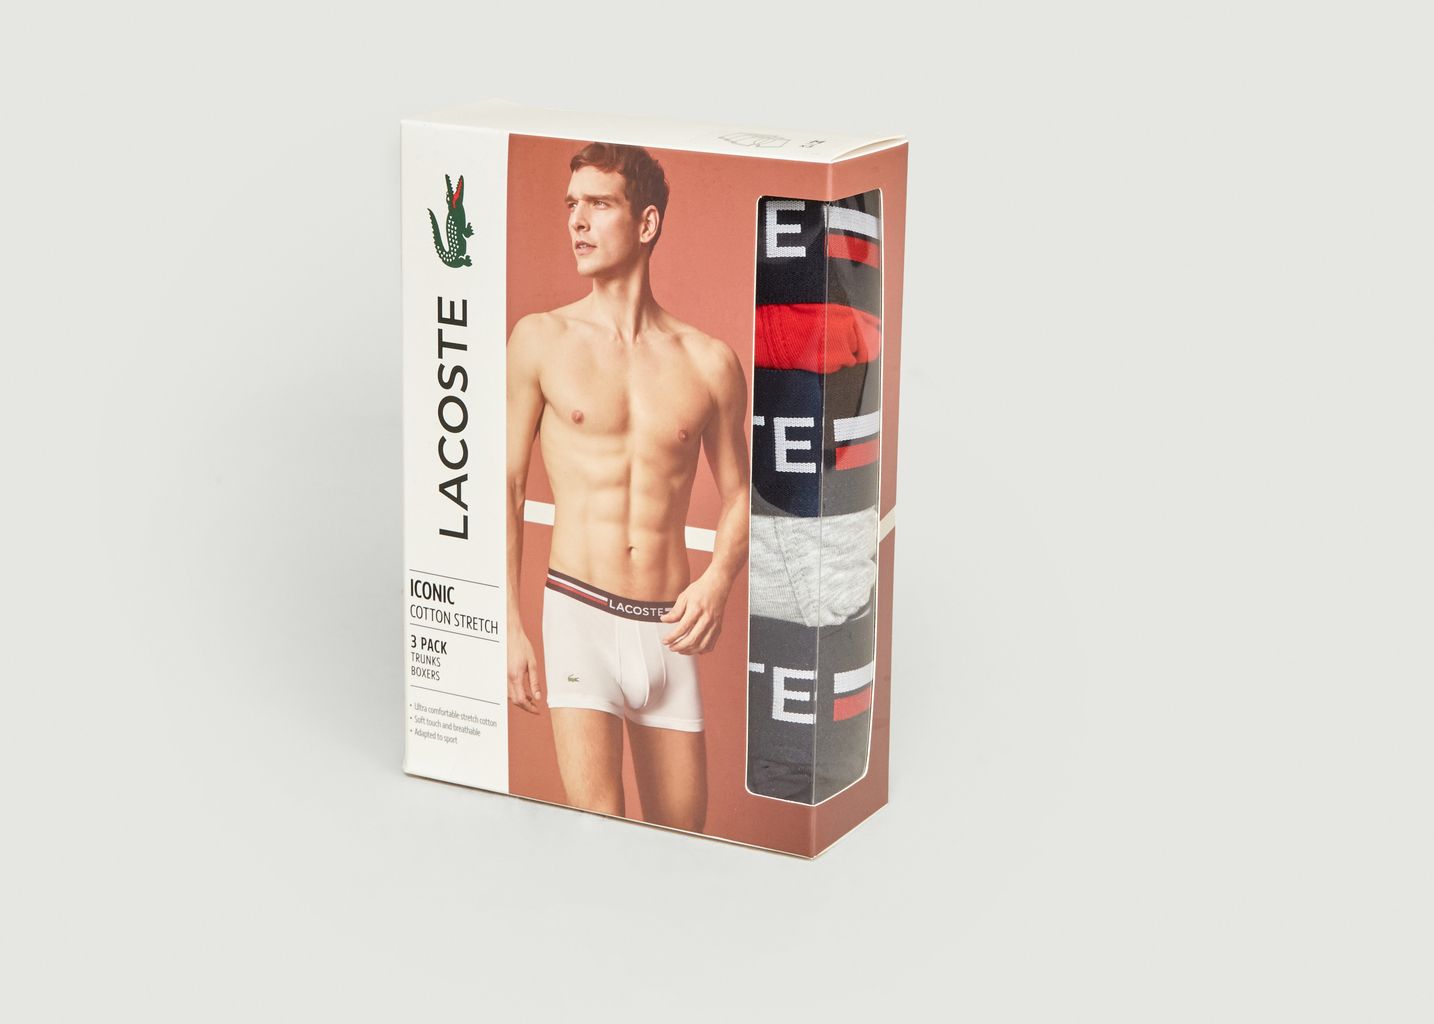 Lacoste Boxer Courts (3 Pack)